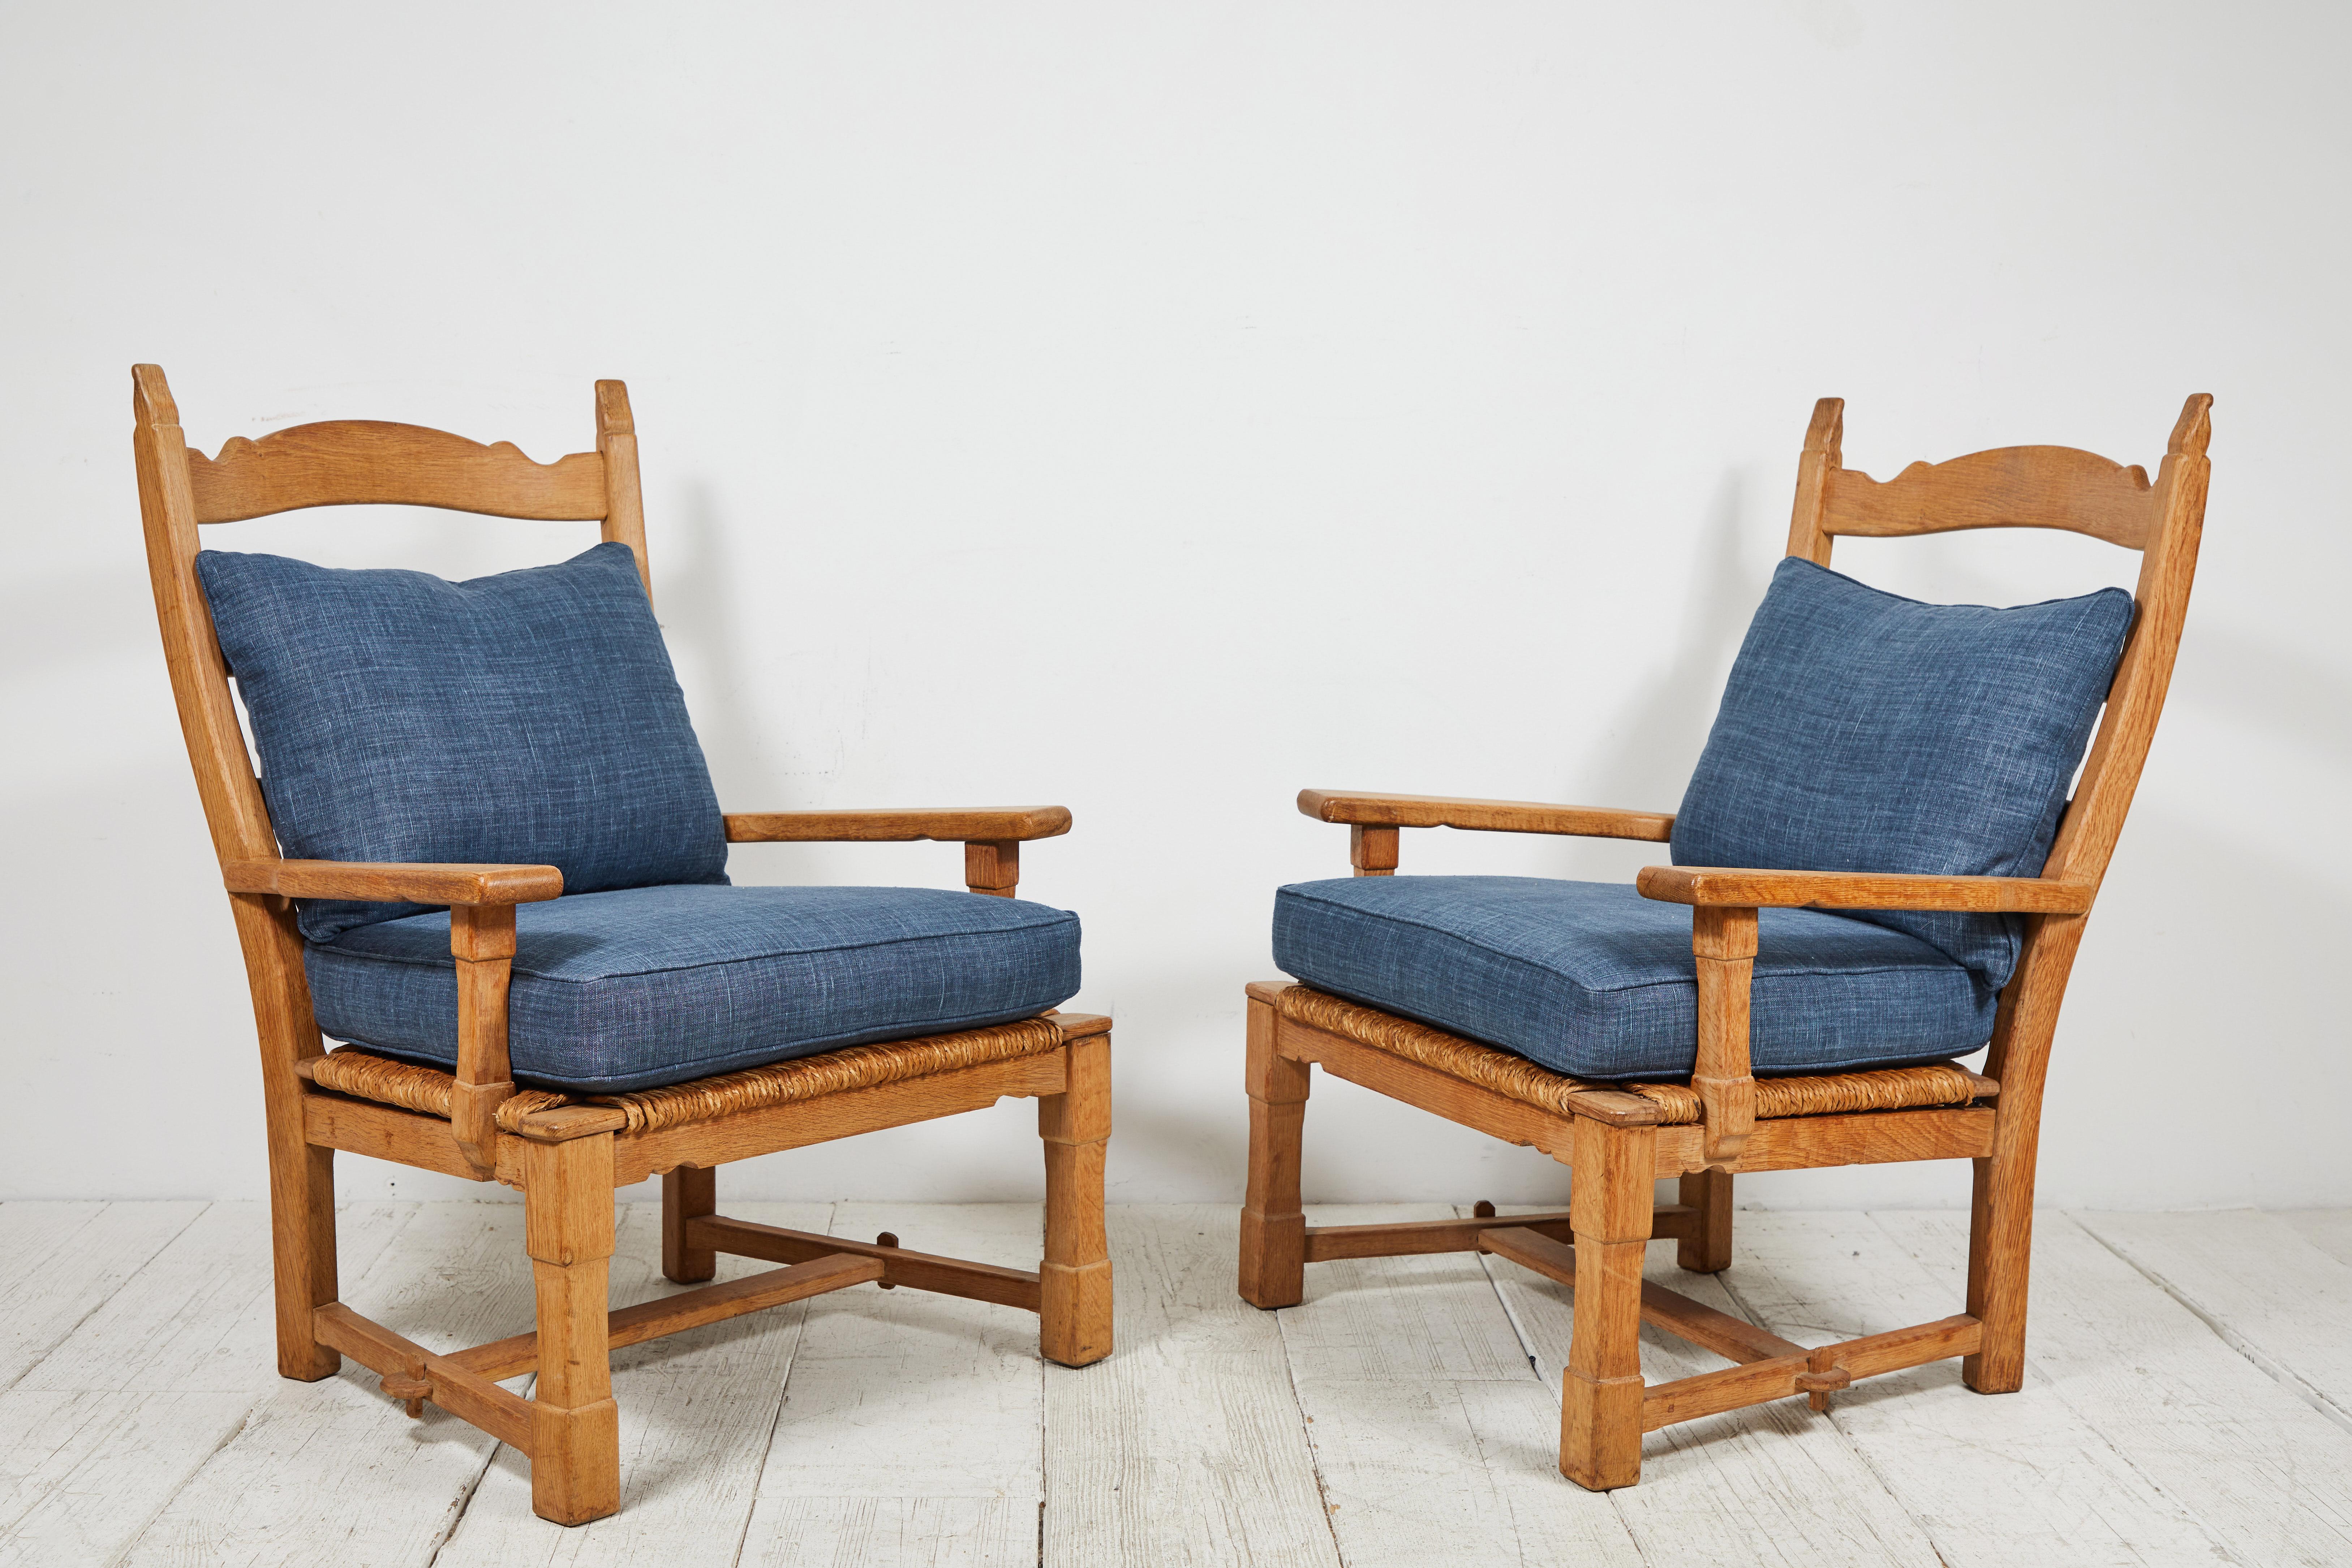 Pair of French wooden ladder back armchairs with rush seat, upholstered in blue linen.